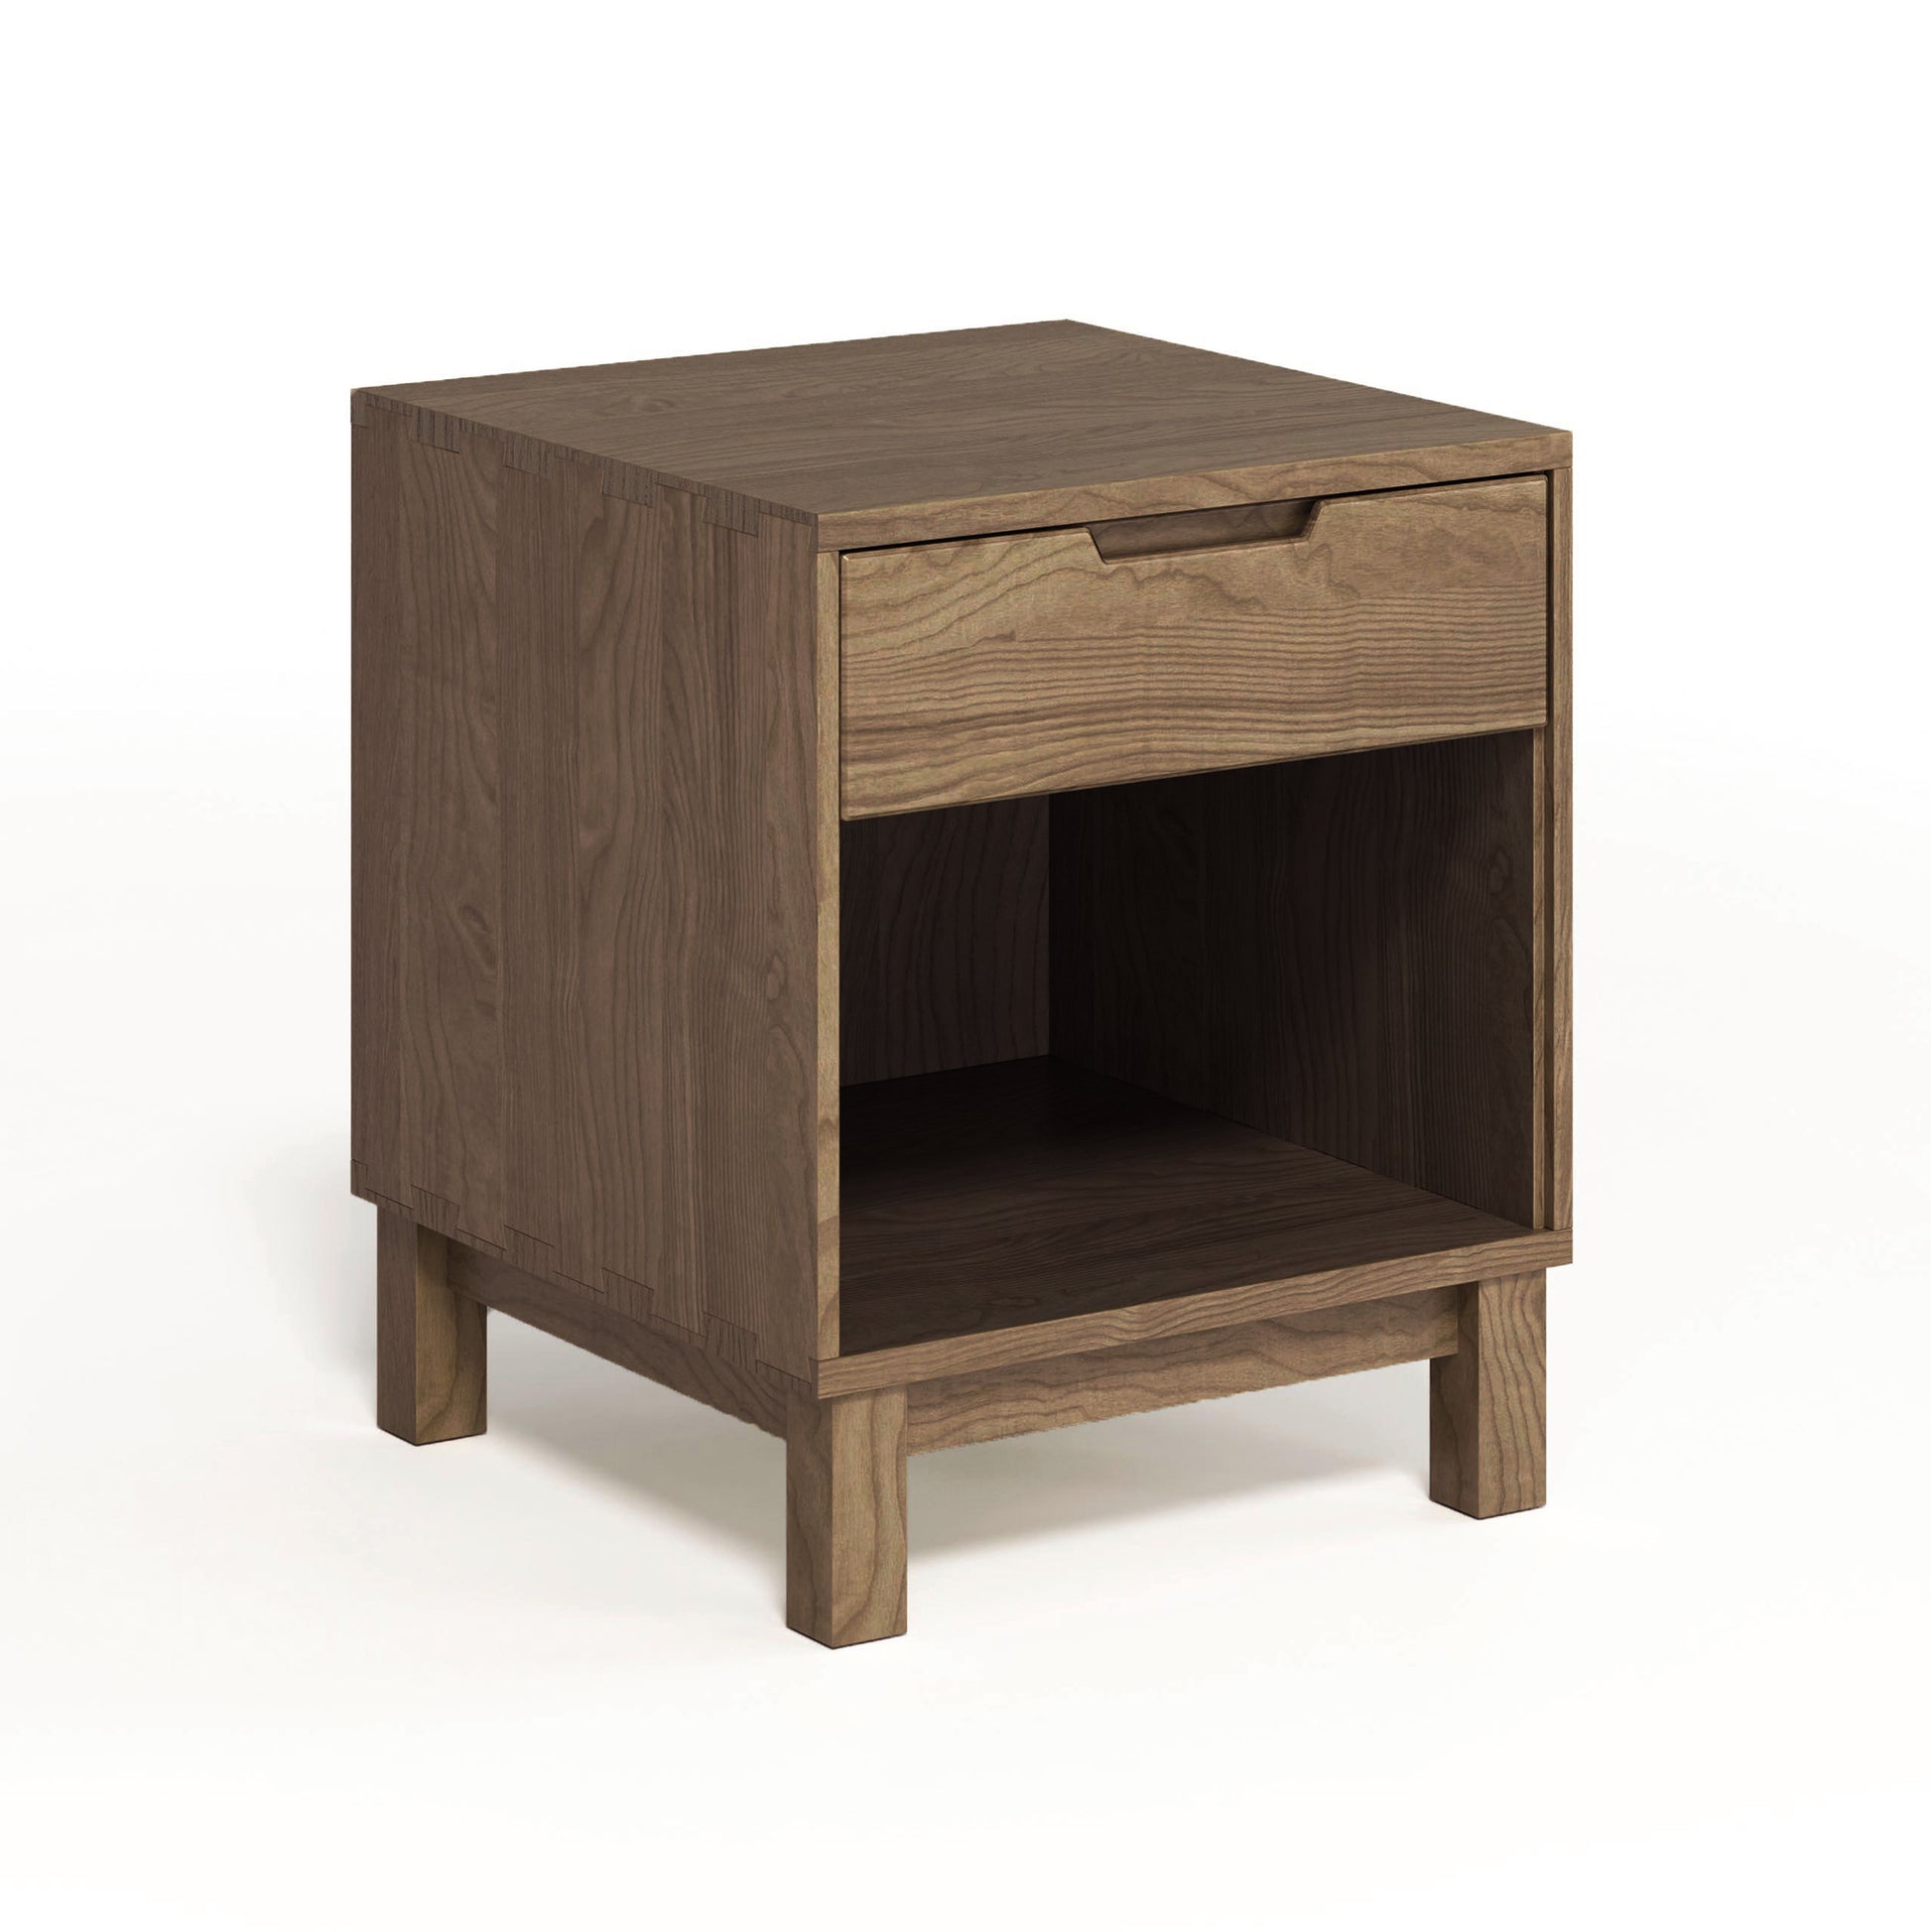 A small Oslo 1-Drawer Enclosed Shelf Nightstand from Copeland Furniture with a solid oak hardwood drawer on top and a wood finish.